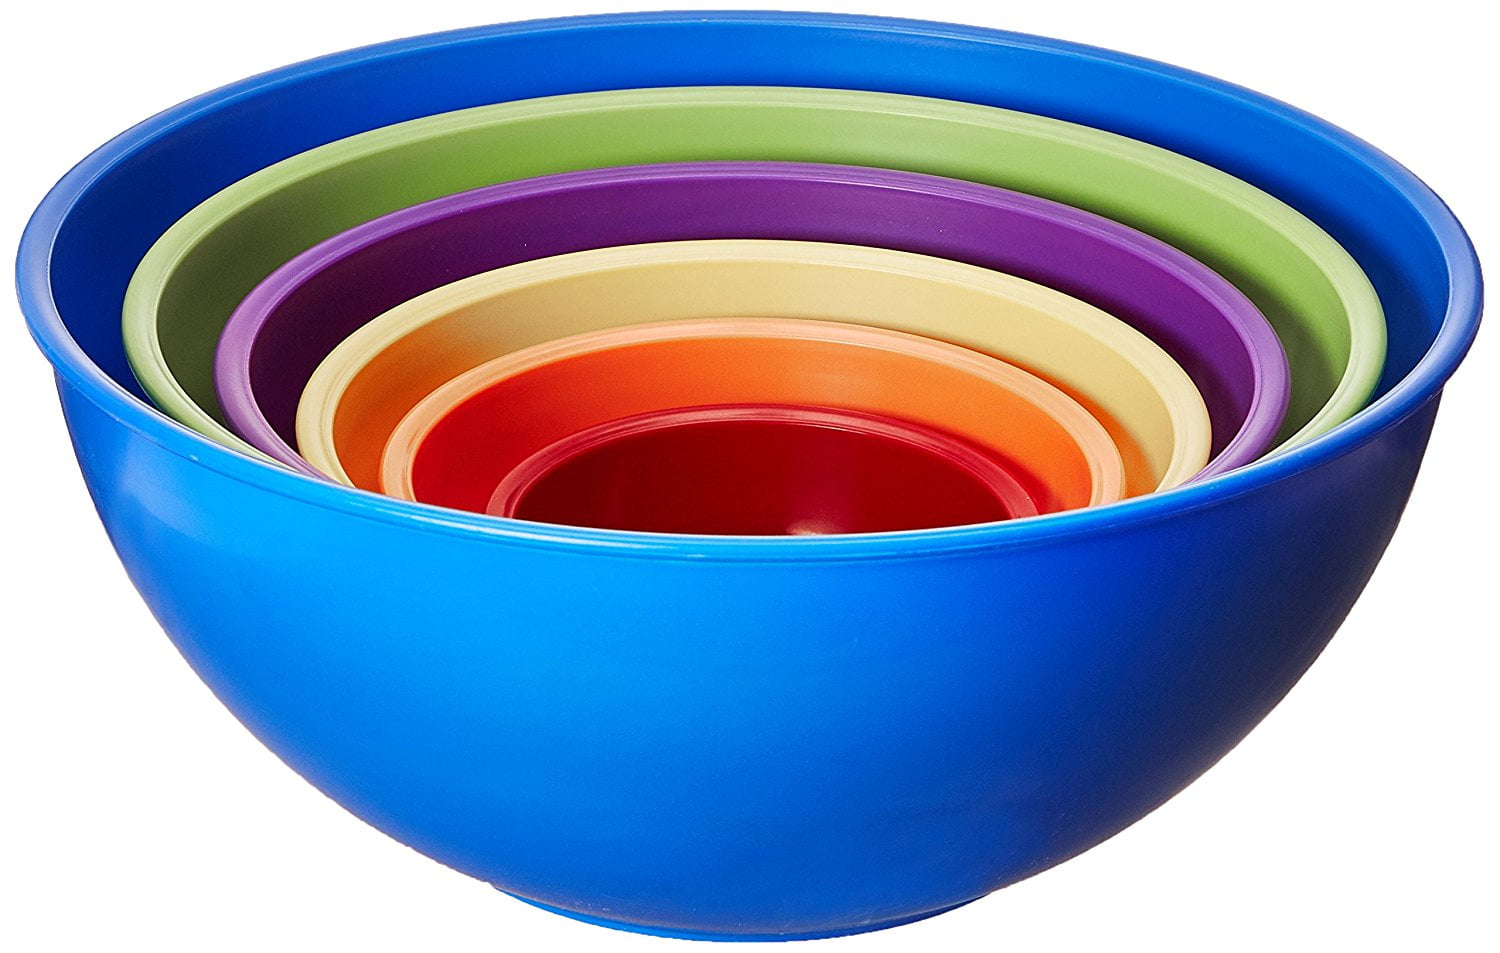 Kitchen 12 Piece Plastic Mixing Bowls with Lids Set - Mixing Bowl Set - Nesting  Bowls with Lids Set - Microwave and Freezer Safe - AliExpress